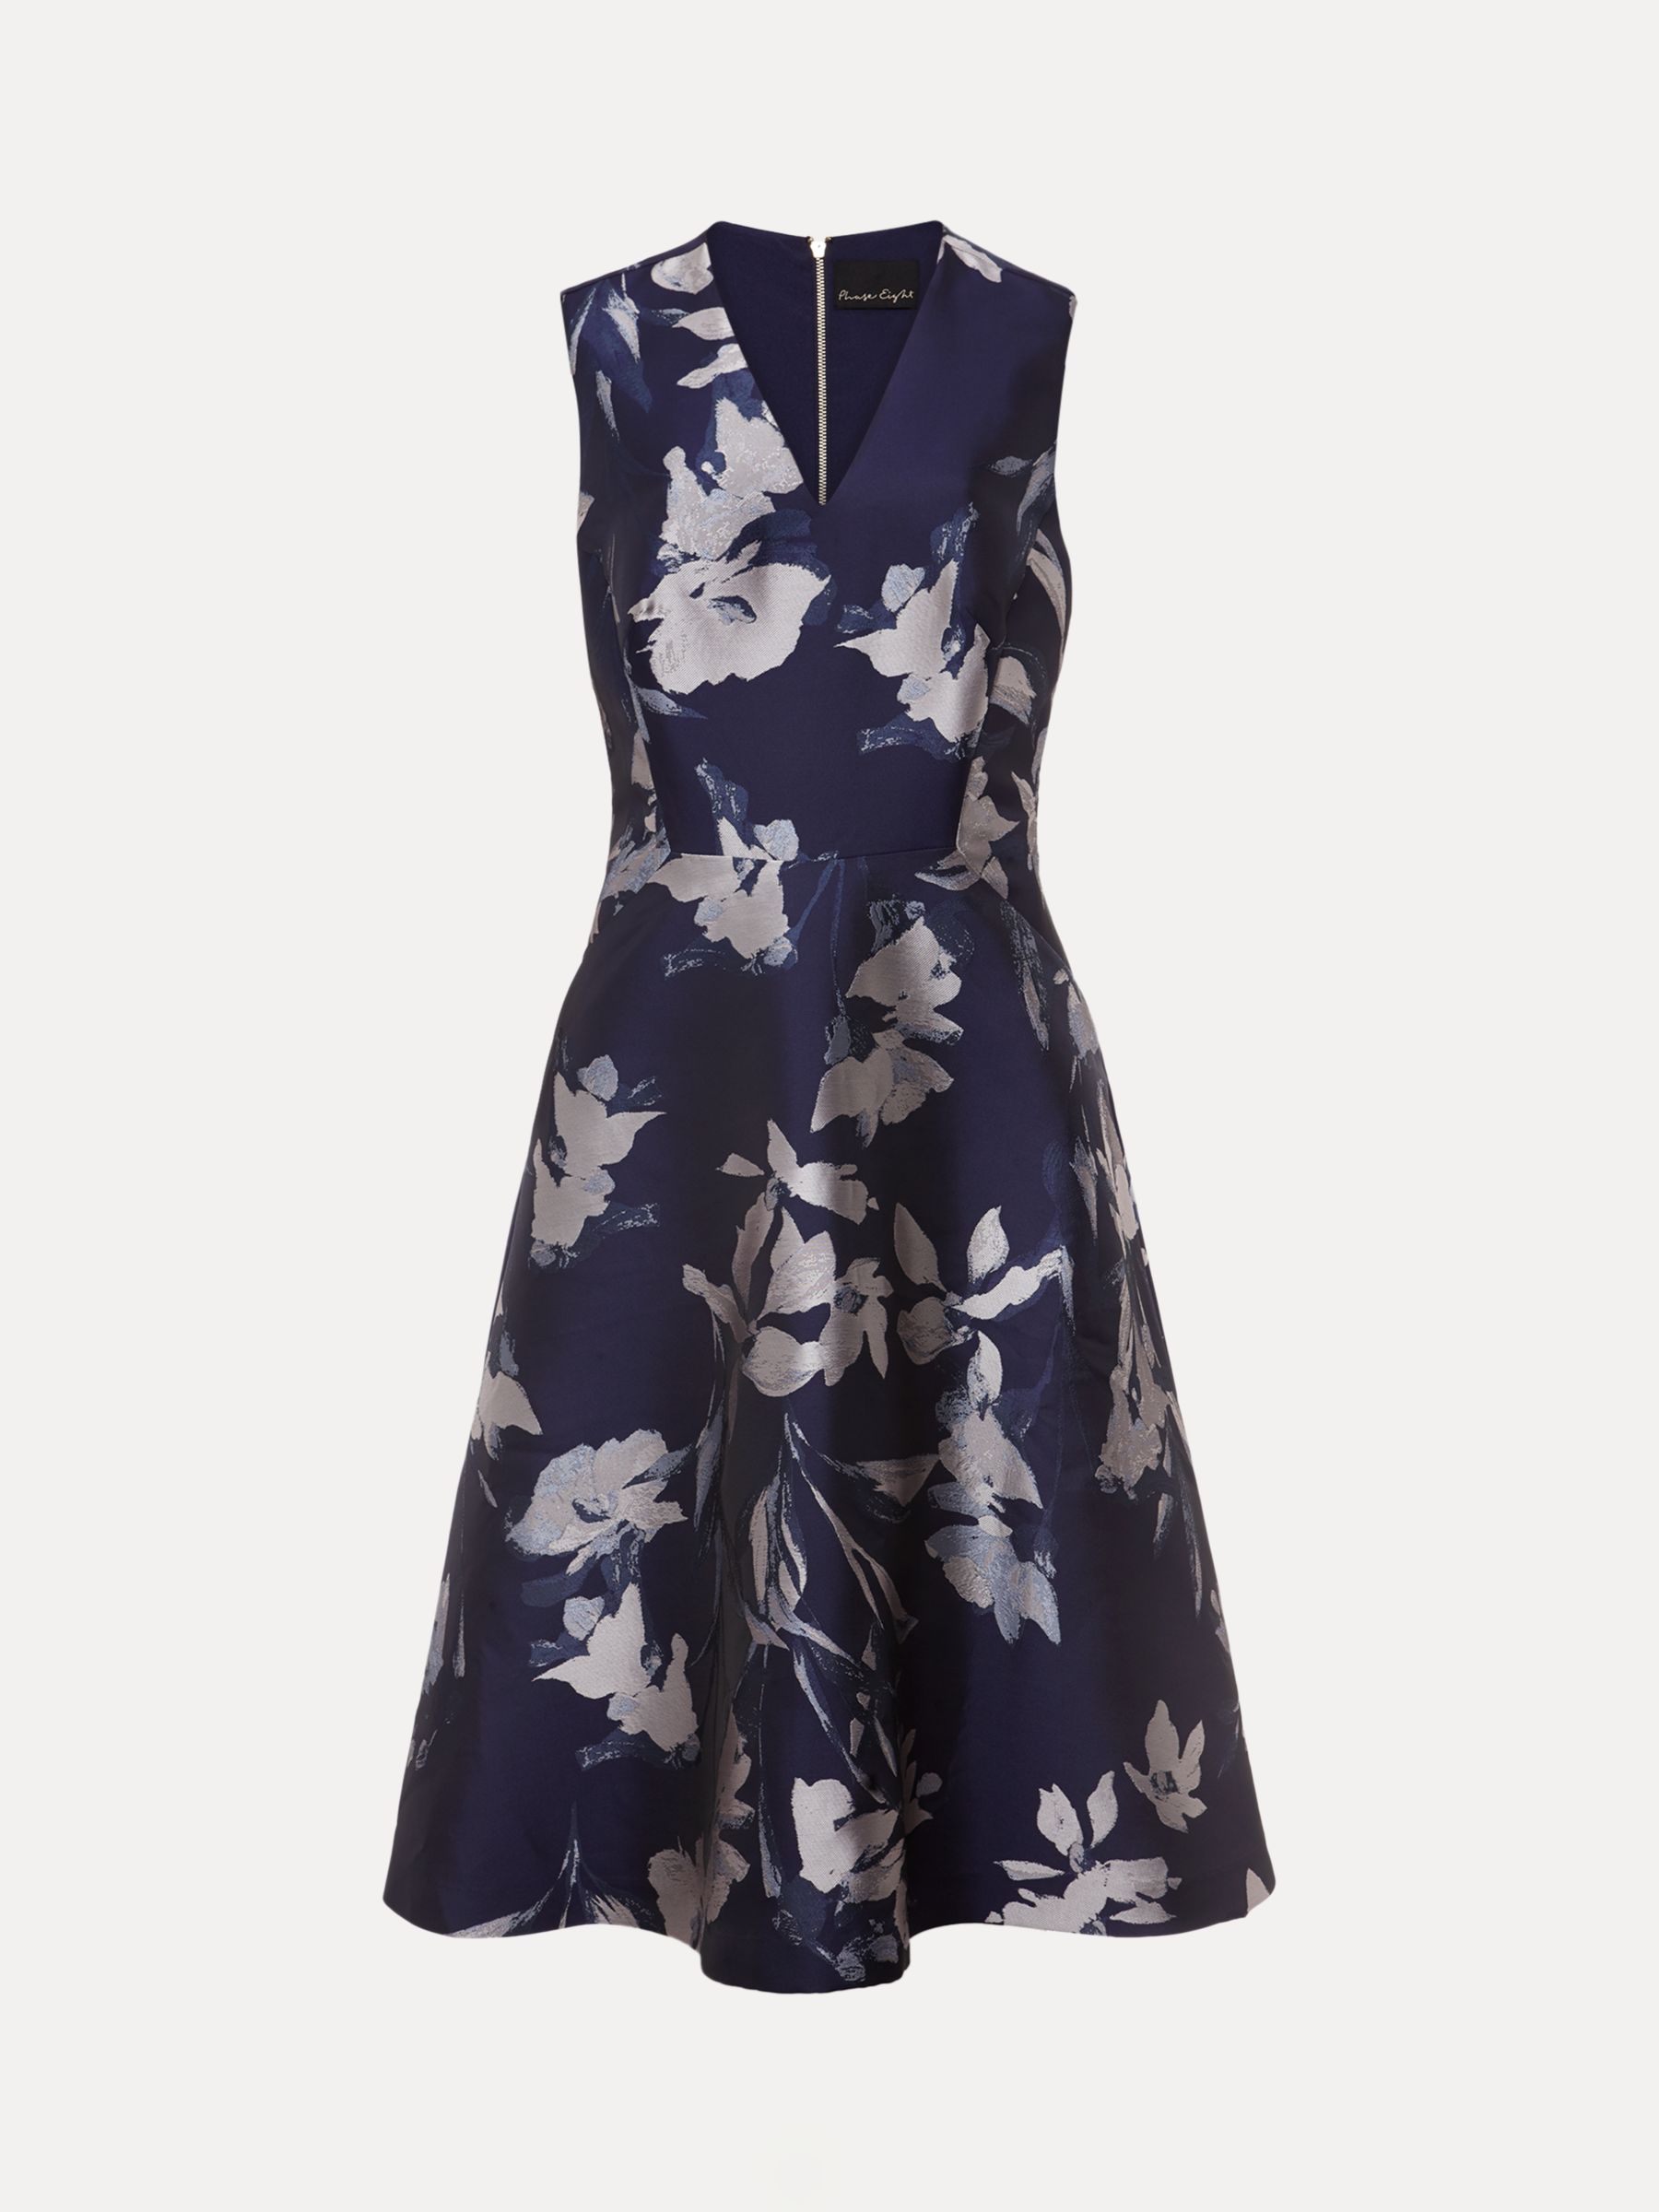 Buy Phase Eight Cassy Floral Jacquard Dress, Navy/Multi Online at johnlewis.com